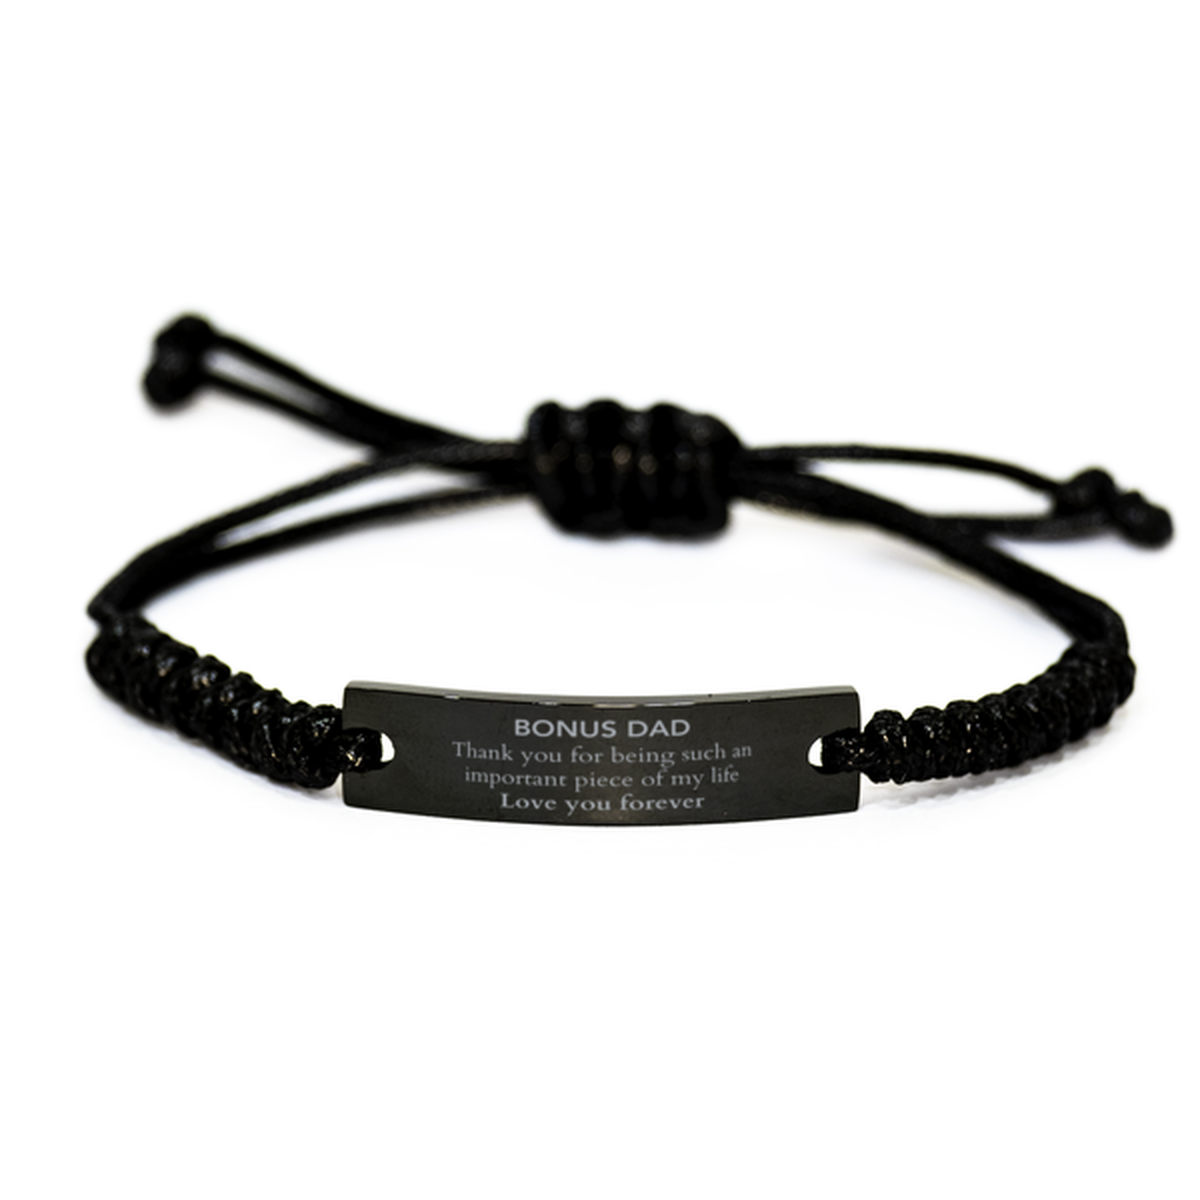 Appropriate Bonus Dad Black Rope Bracelet Epic Birthday Gifts for Bonus Dad Thank you for being such an important piece of my life Bonus Dad Christmas Mothers Fathers Day